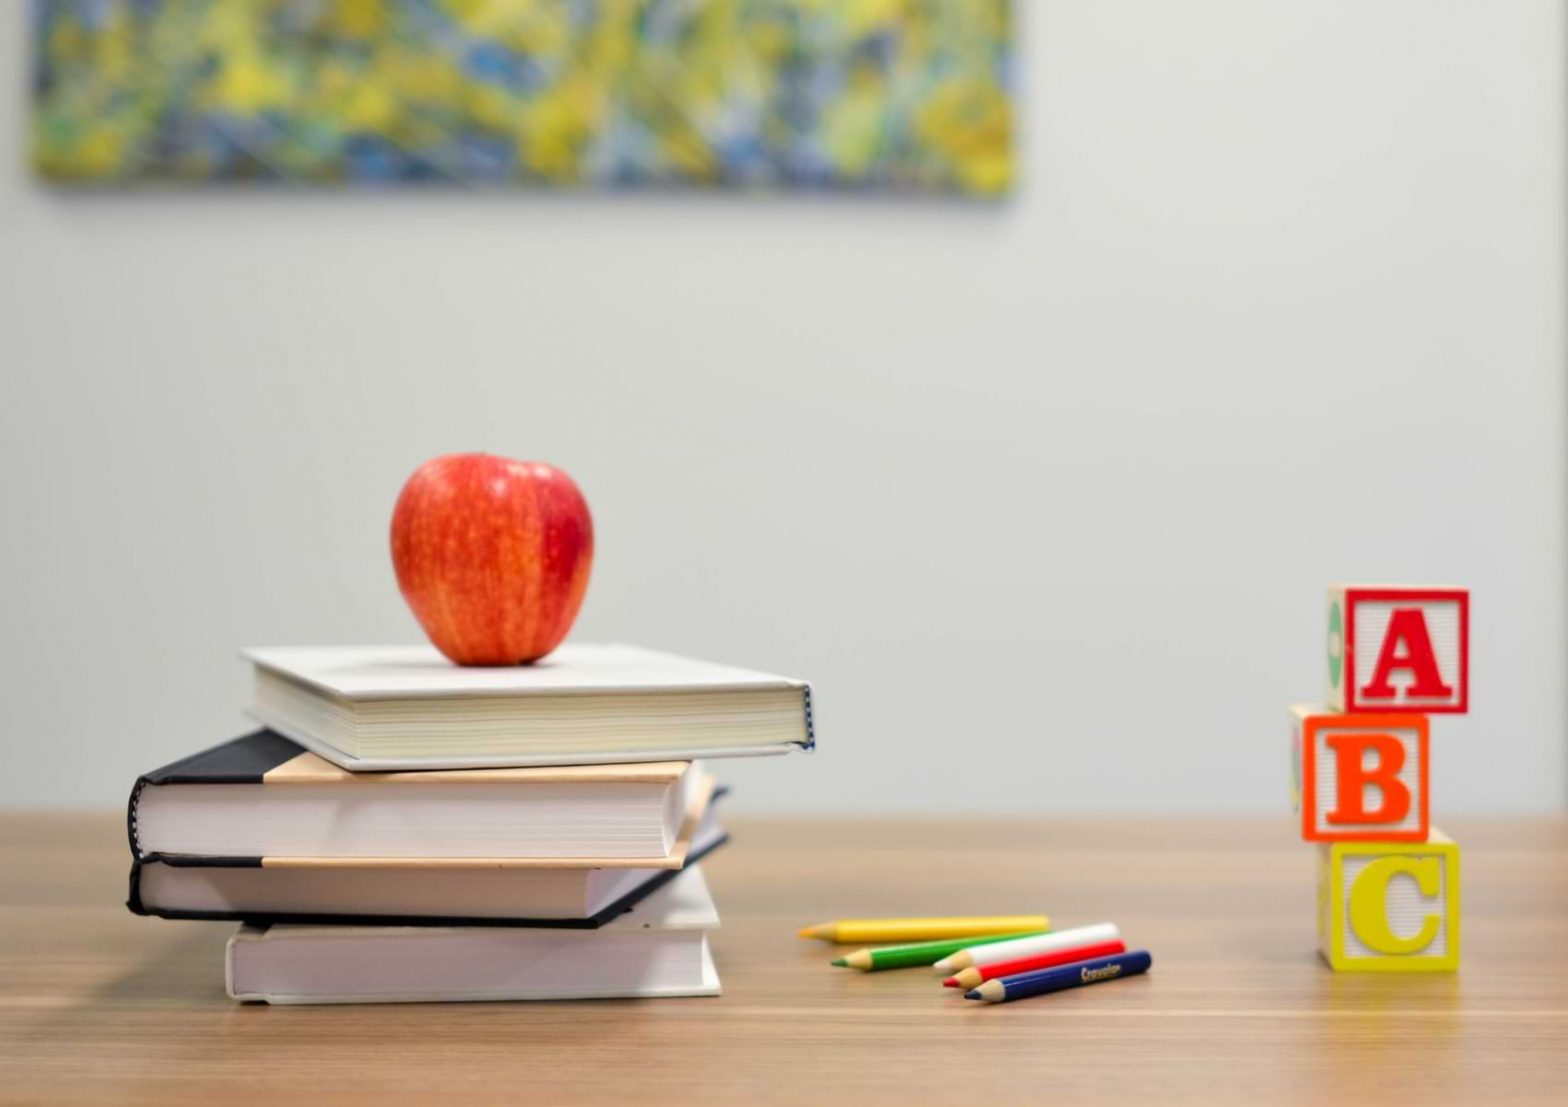 A desk is crowded with books, blocks, pencils and an apple, classic back to school materials